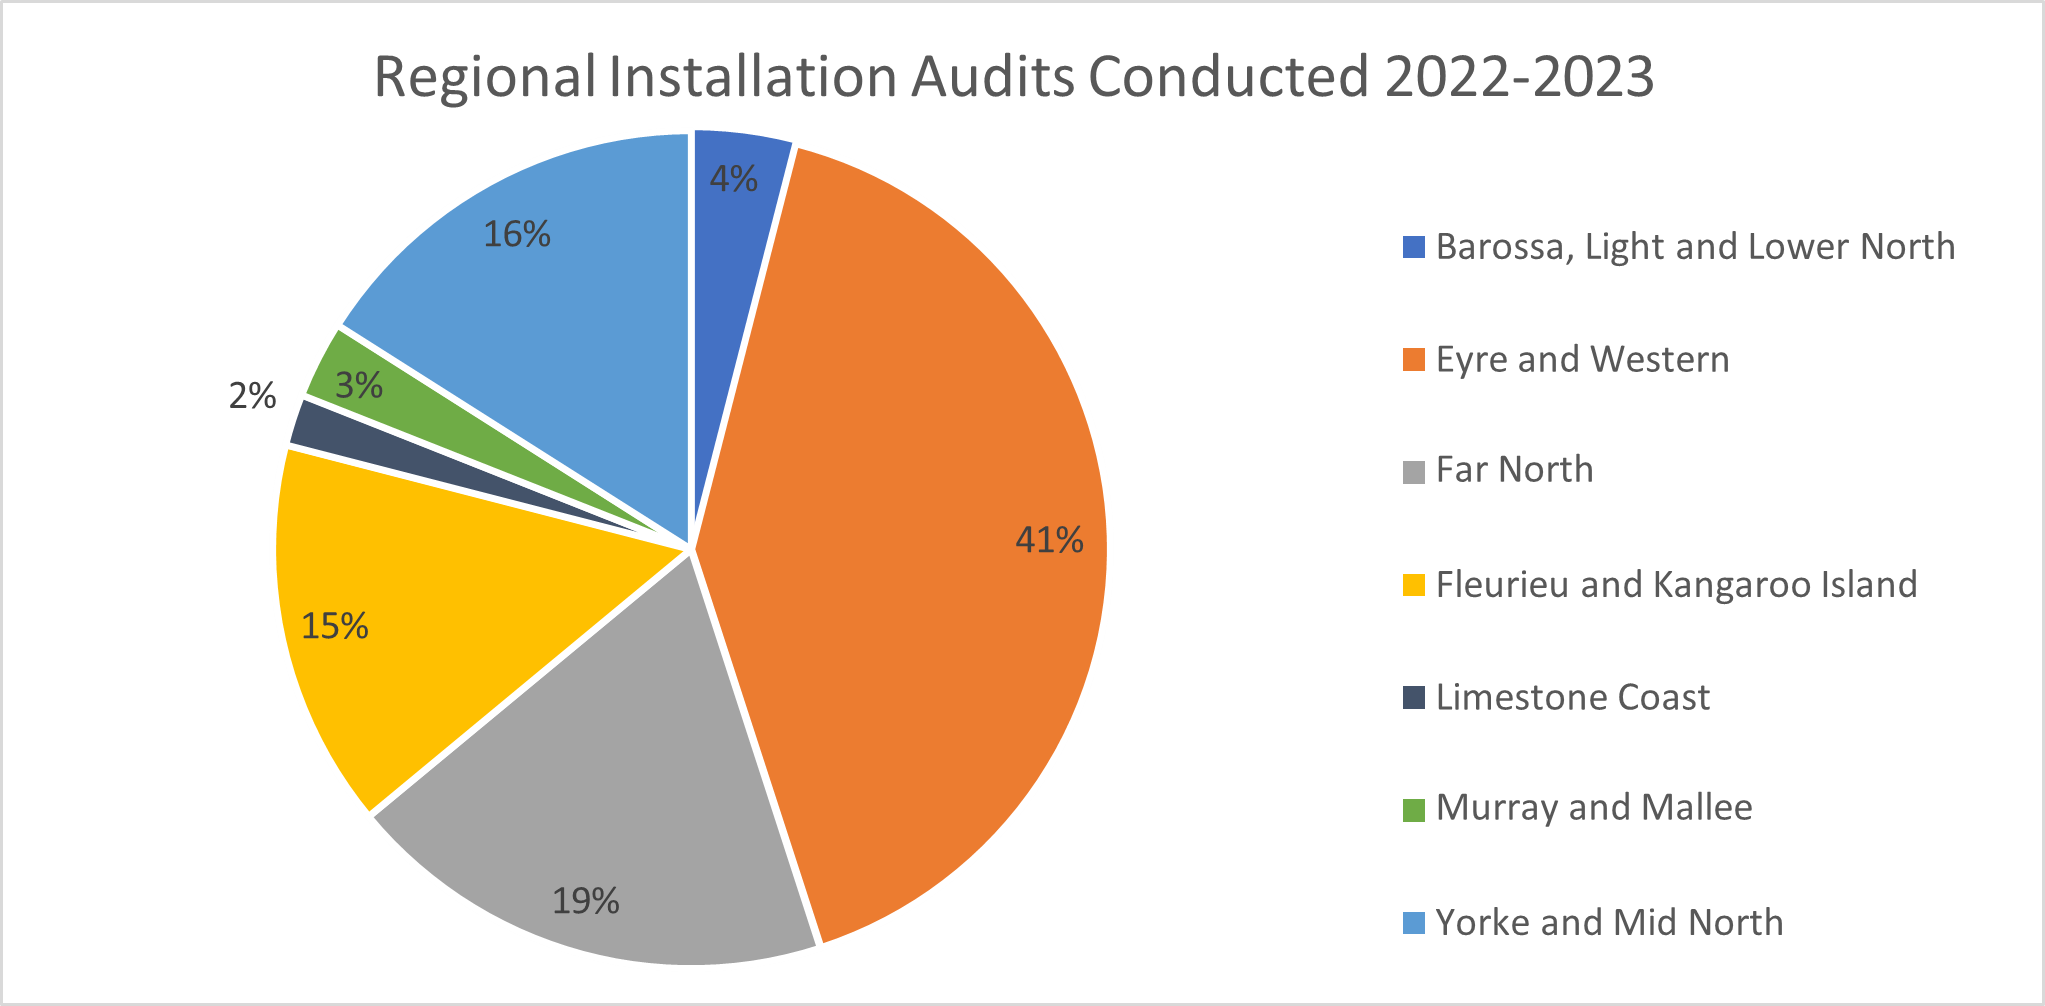 Pie chart showing spread of regional on-site plumbing installation audits for 2022-2023. Barossa, Light and Lower North 4%. Eyre and Western 41%. Far North 19%. Fleurieu and Kangaroo Island 15%. Limestone Coast 2%. Murray and Mallee 3%. Yorke and Mid North 16%.